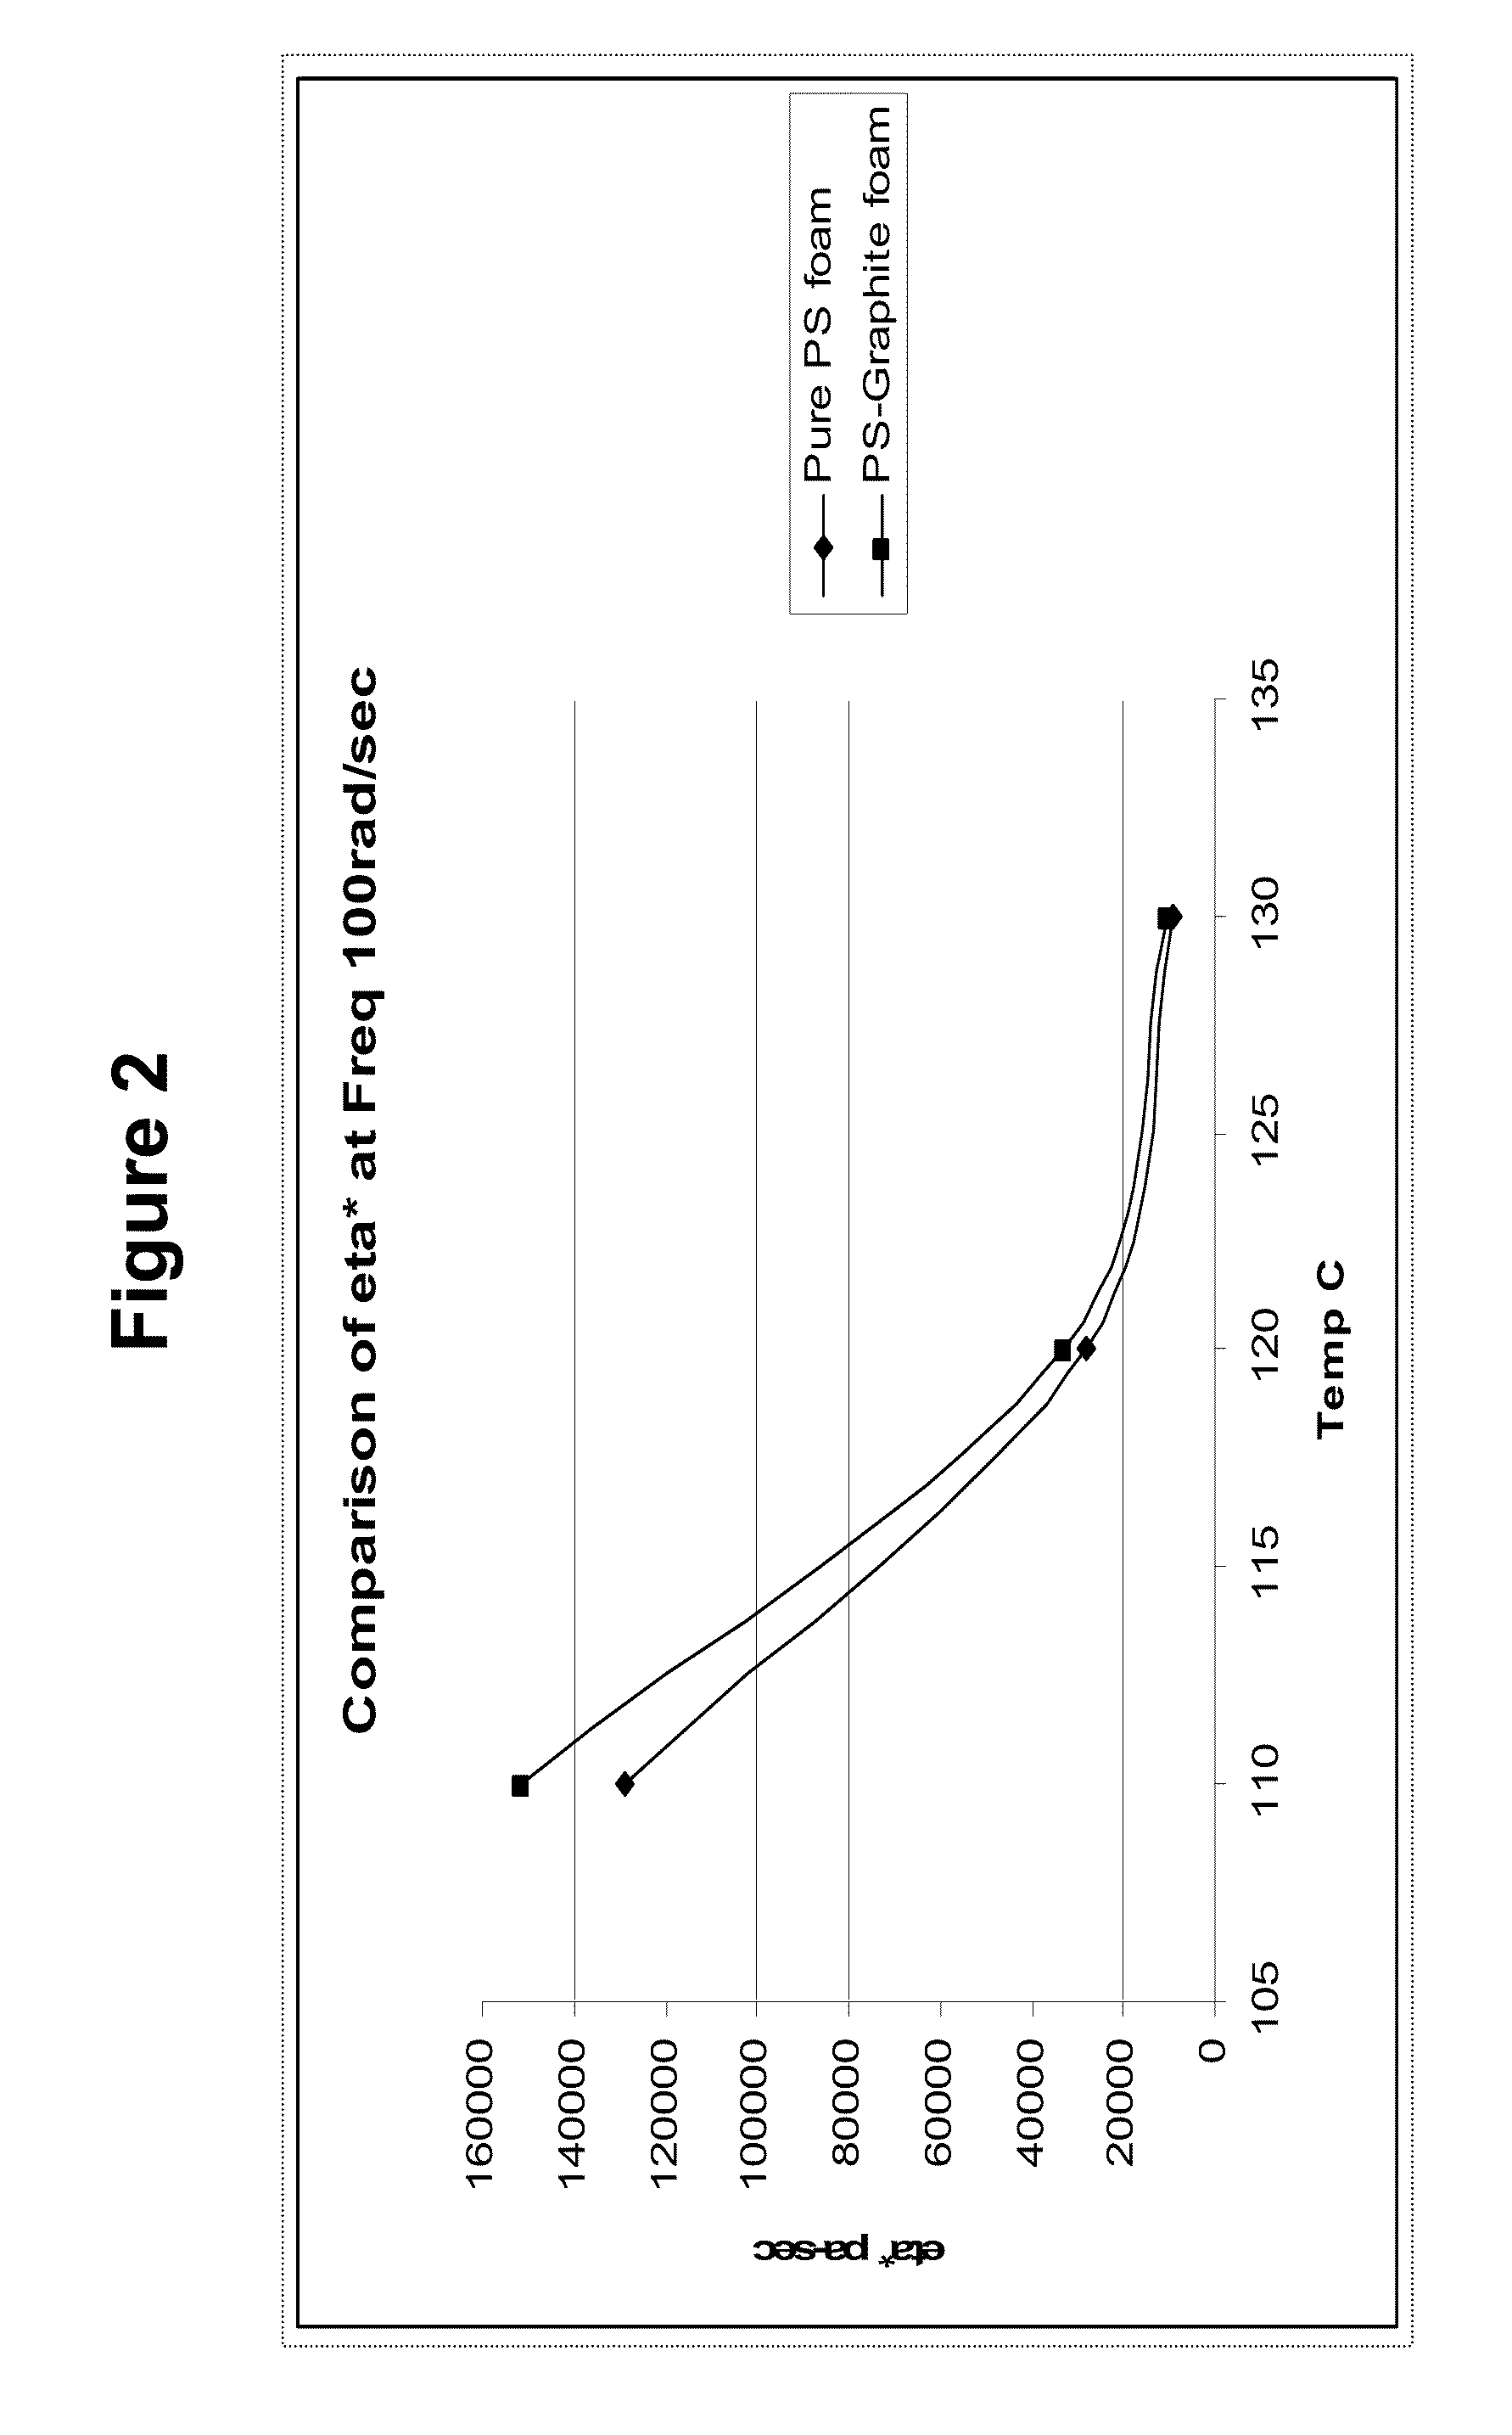 Thermoplastic foams and method of forming them using nano-graphite